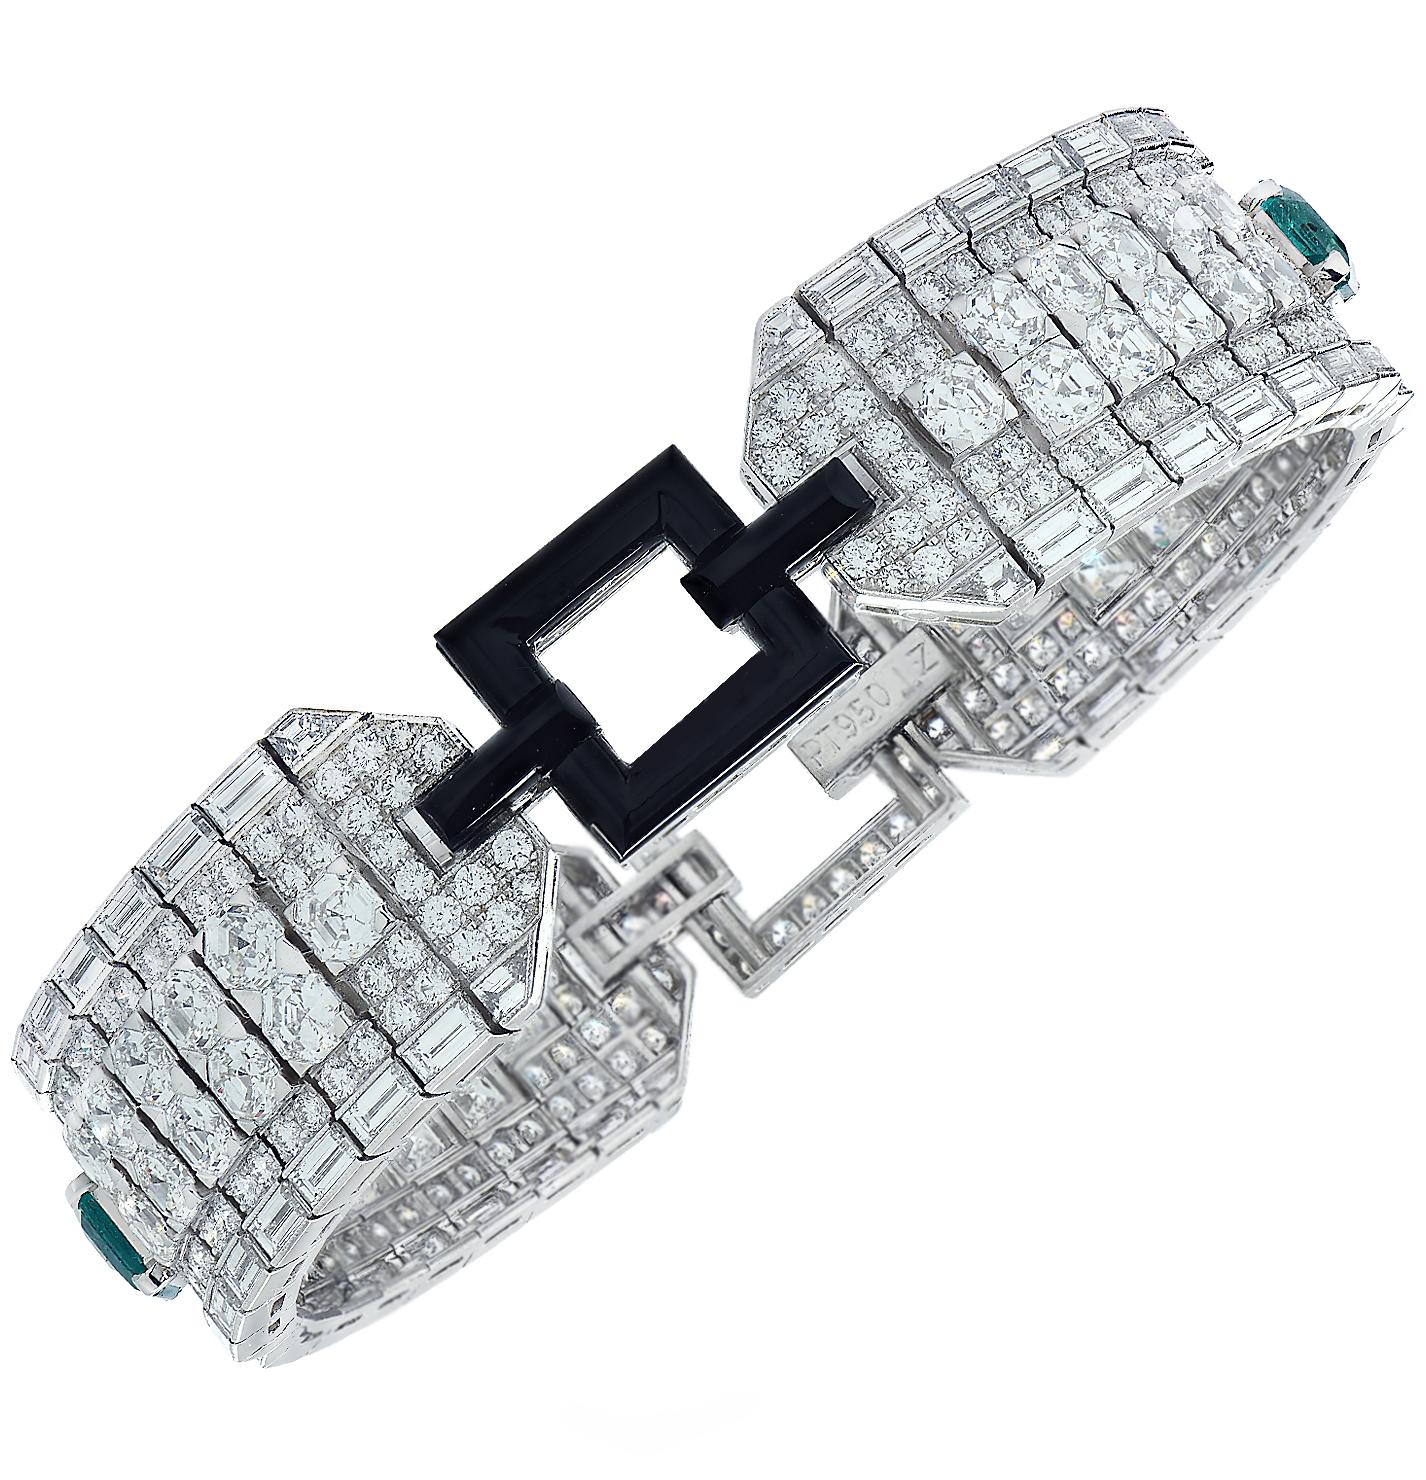 An extraordinary work of art, this captivating bracelet is meticulously handcrafted in platinum. It serves as a celestial canvas to an assemblage of 362 scintillating diamonds, collectively weighing approximately 25.12 carats total, F-G color,